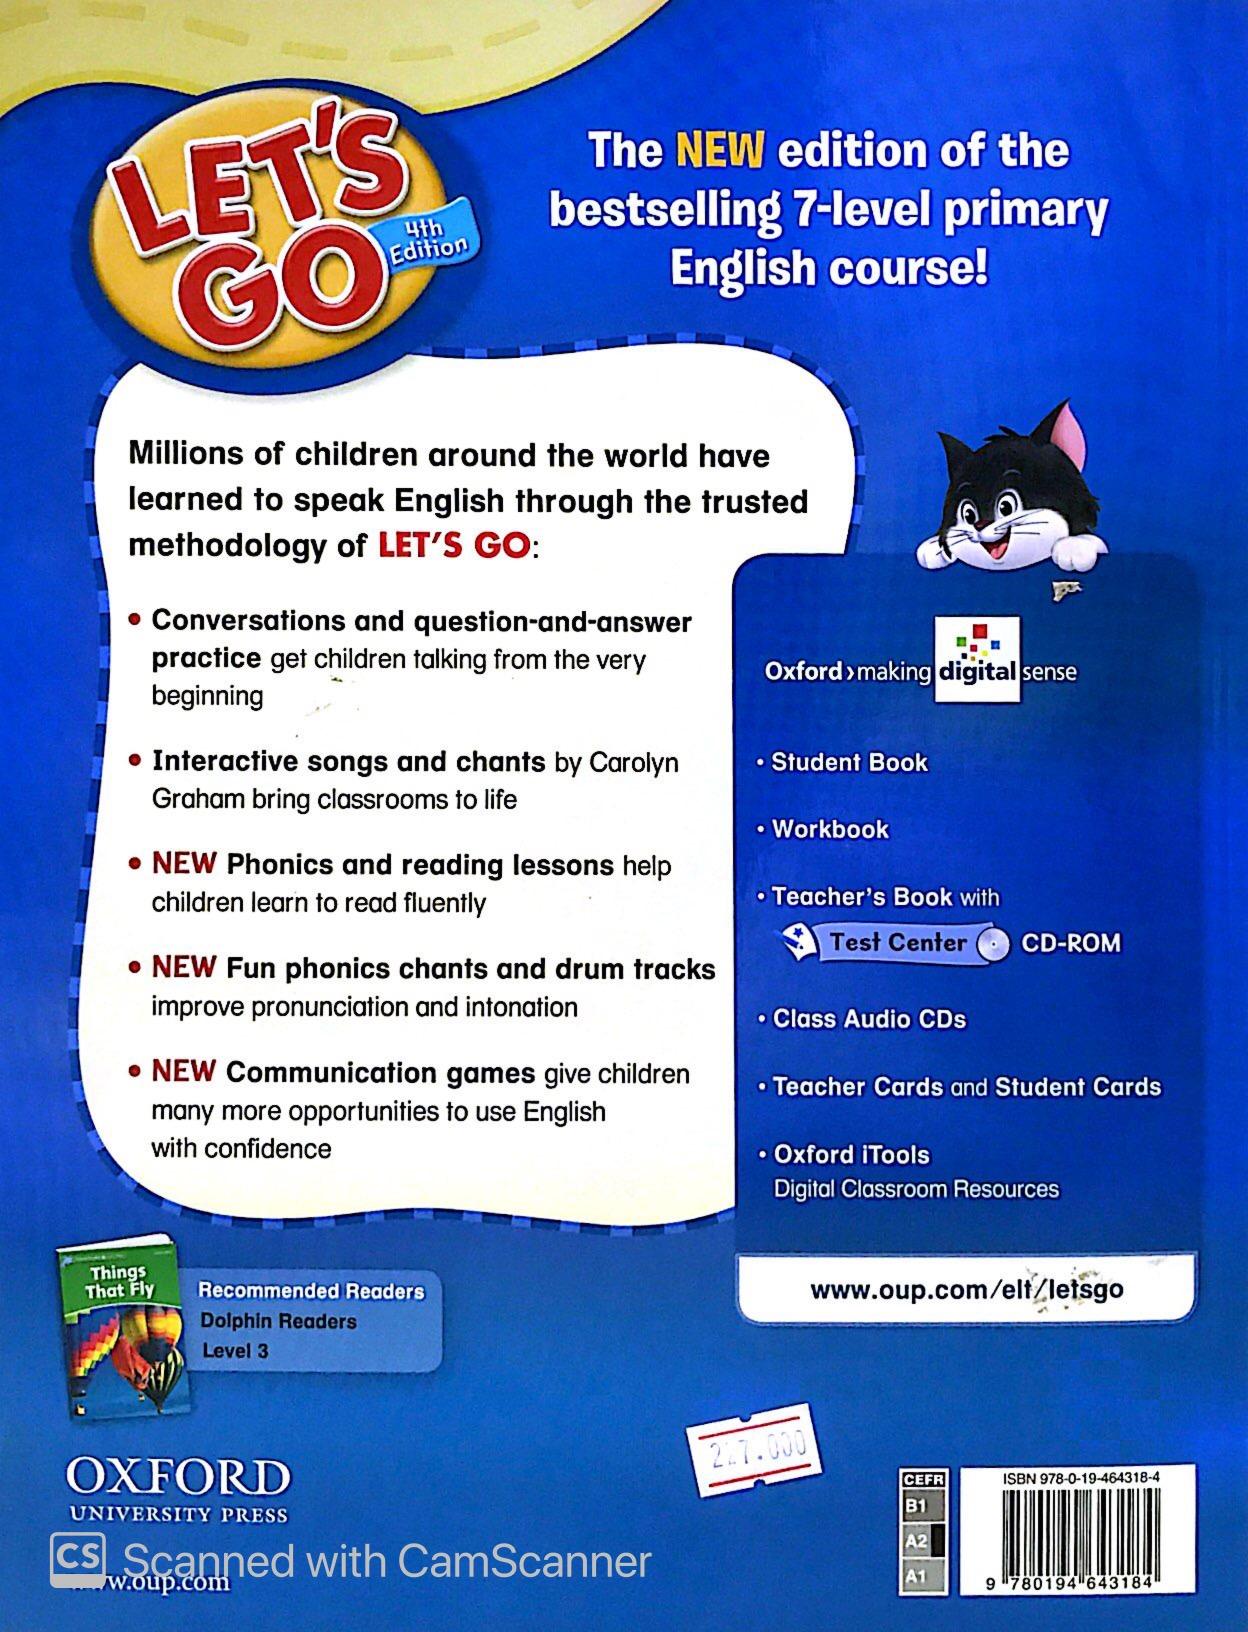 Let's Go 4Ed - 3B: Student Book and Workbook